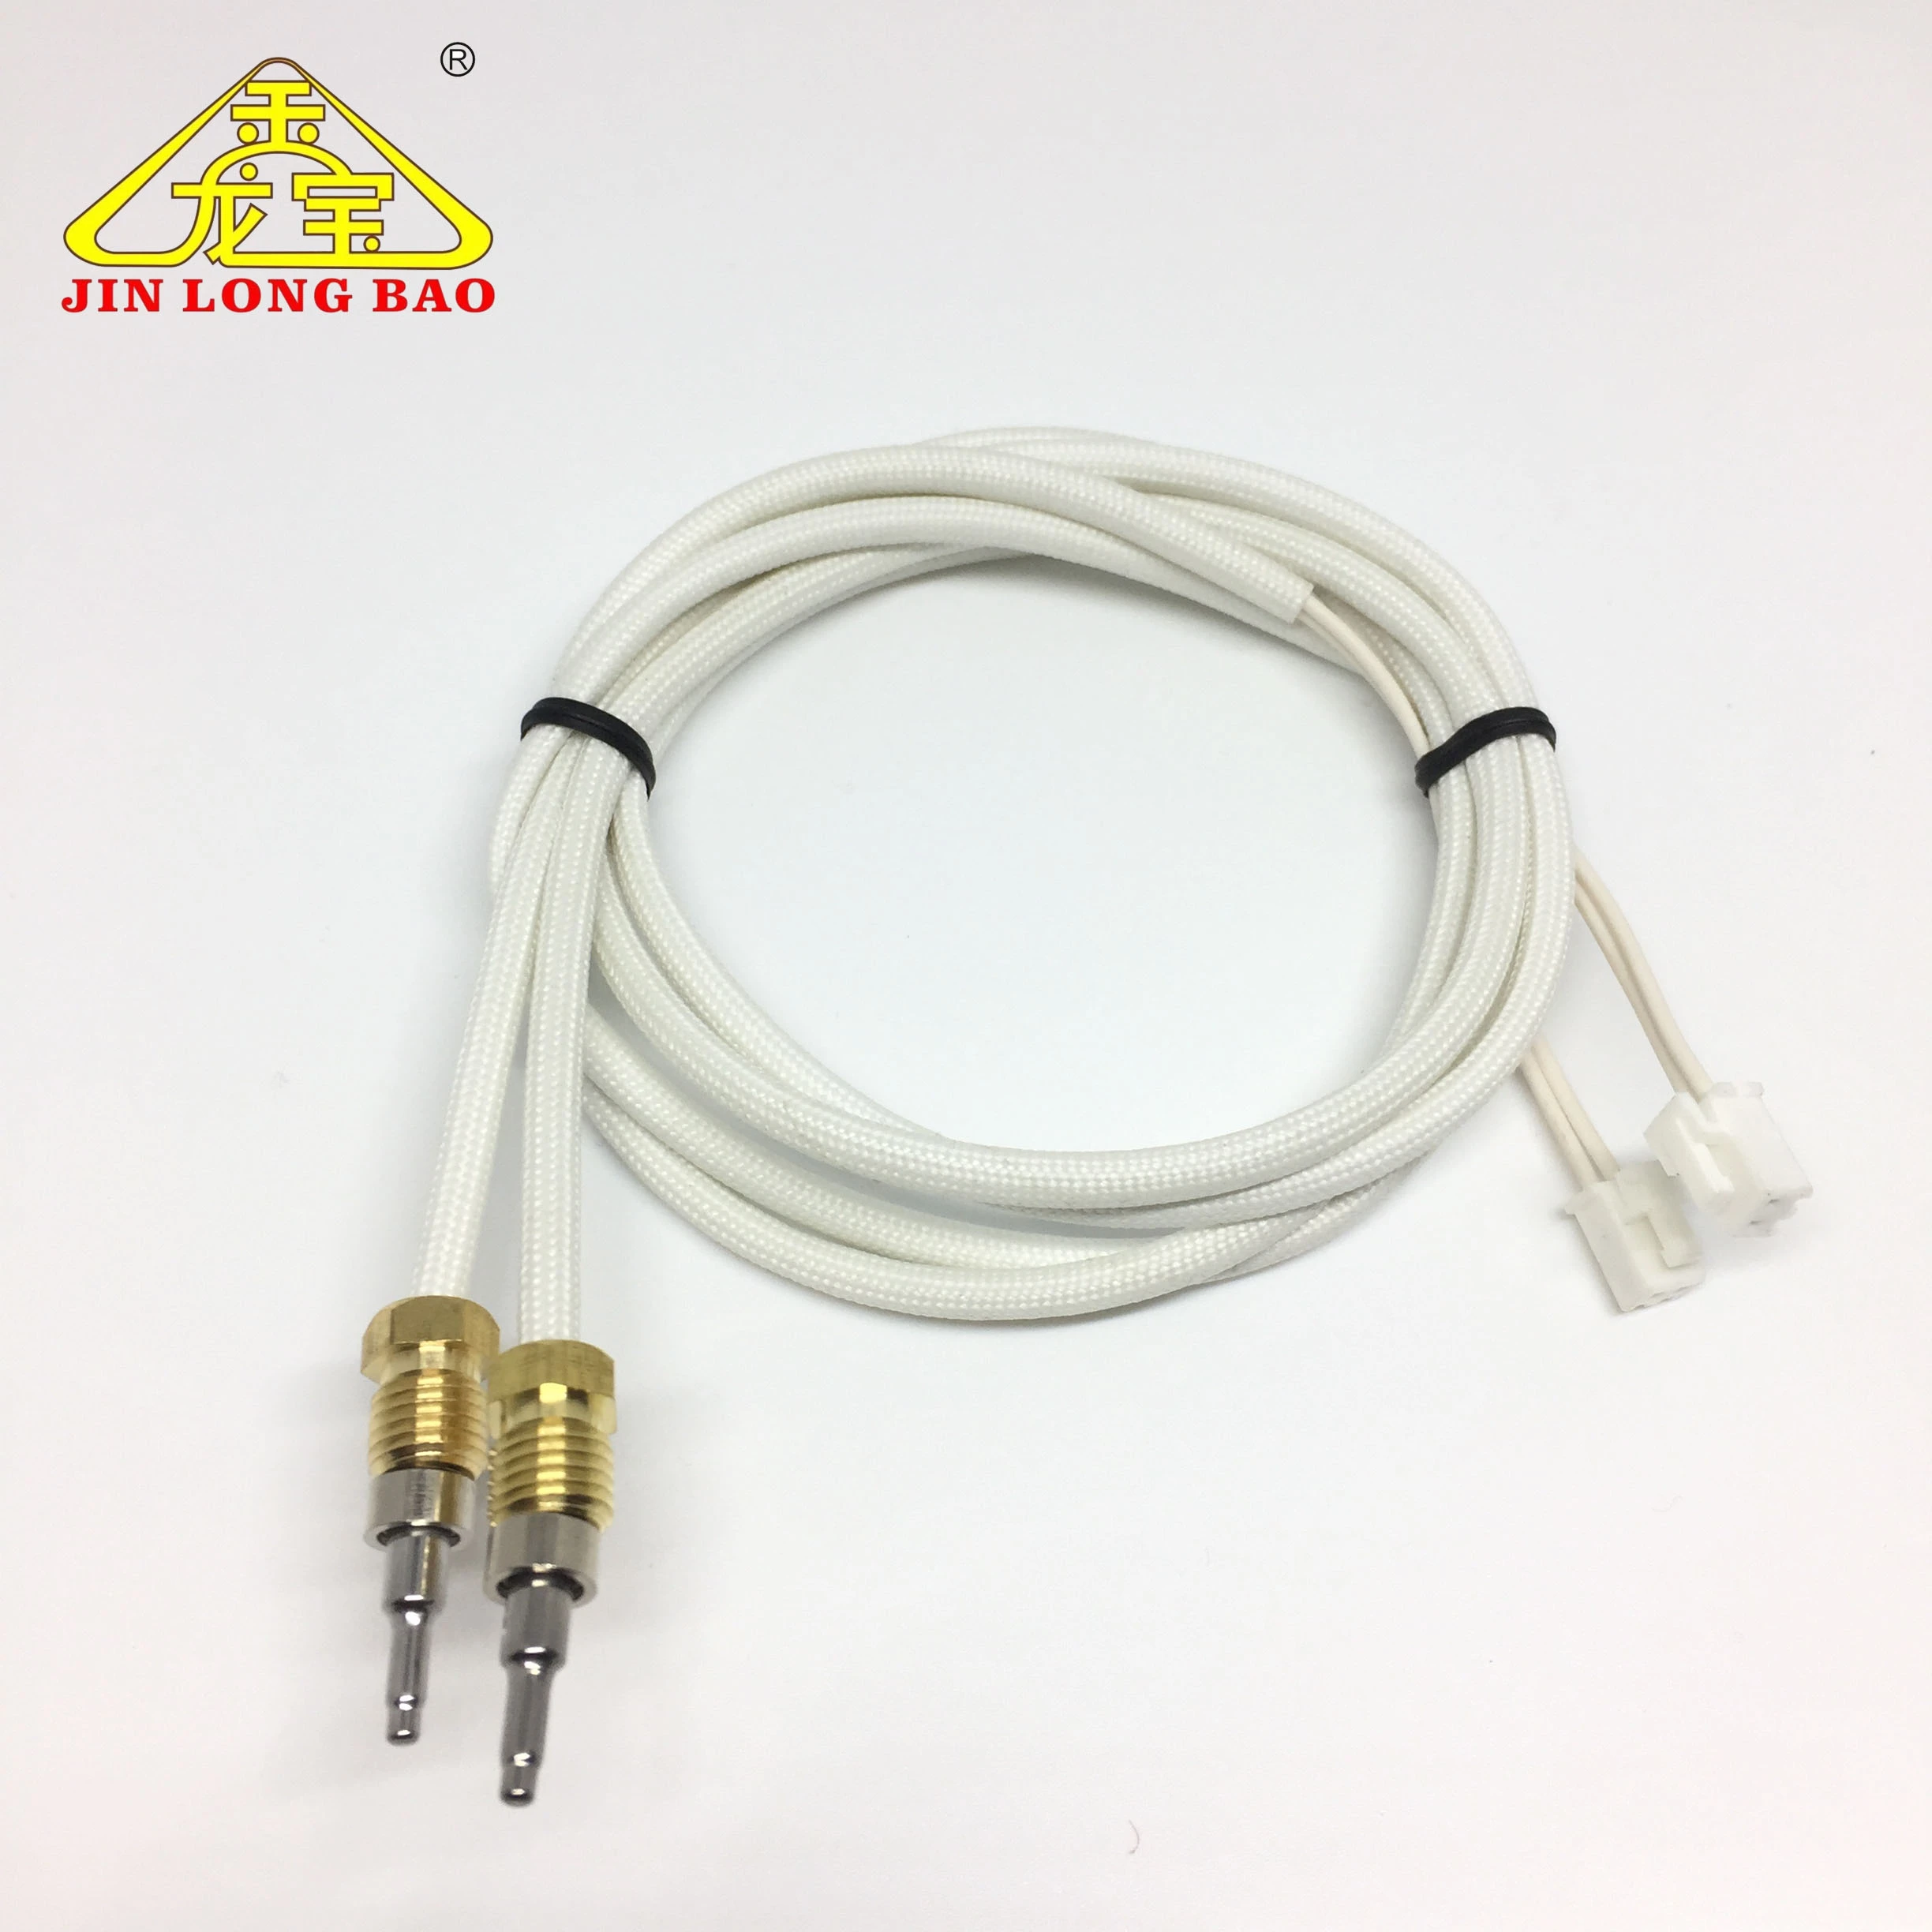 Bullet probe ntc thermistor water temperature sensor for heaters